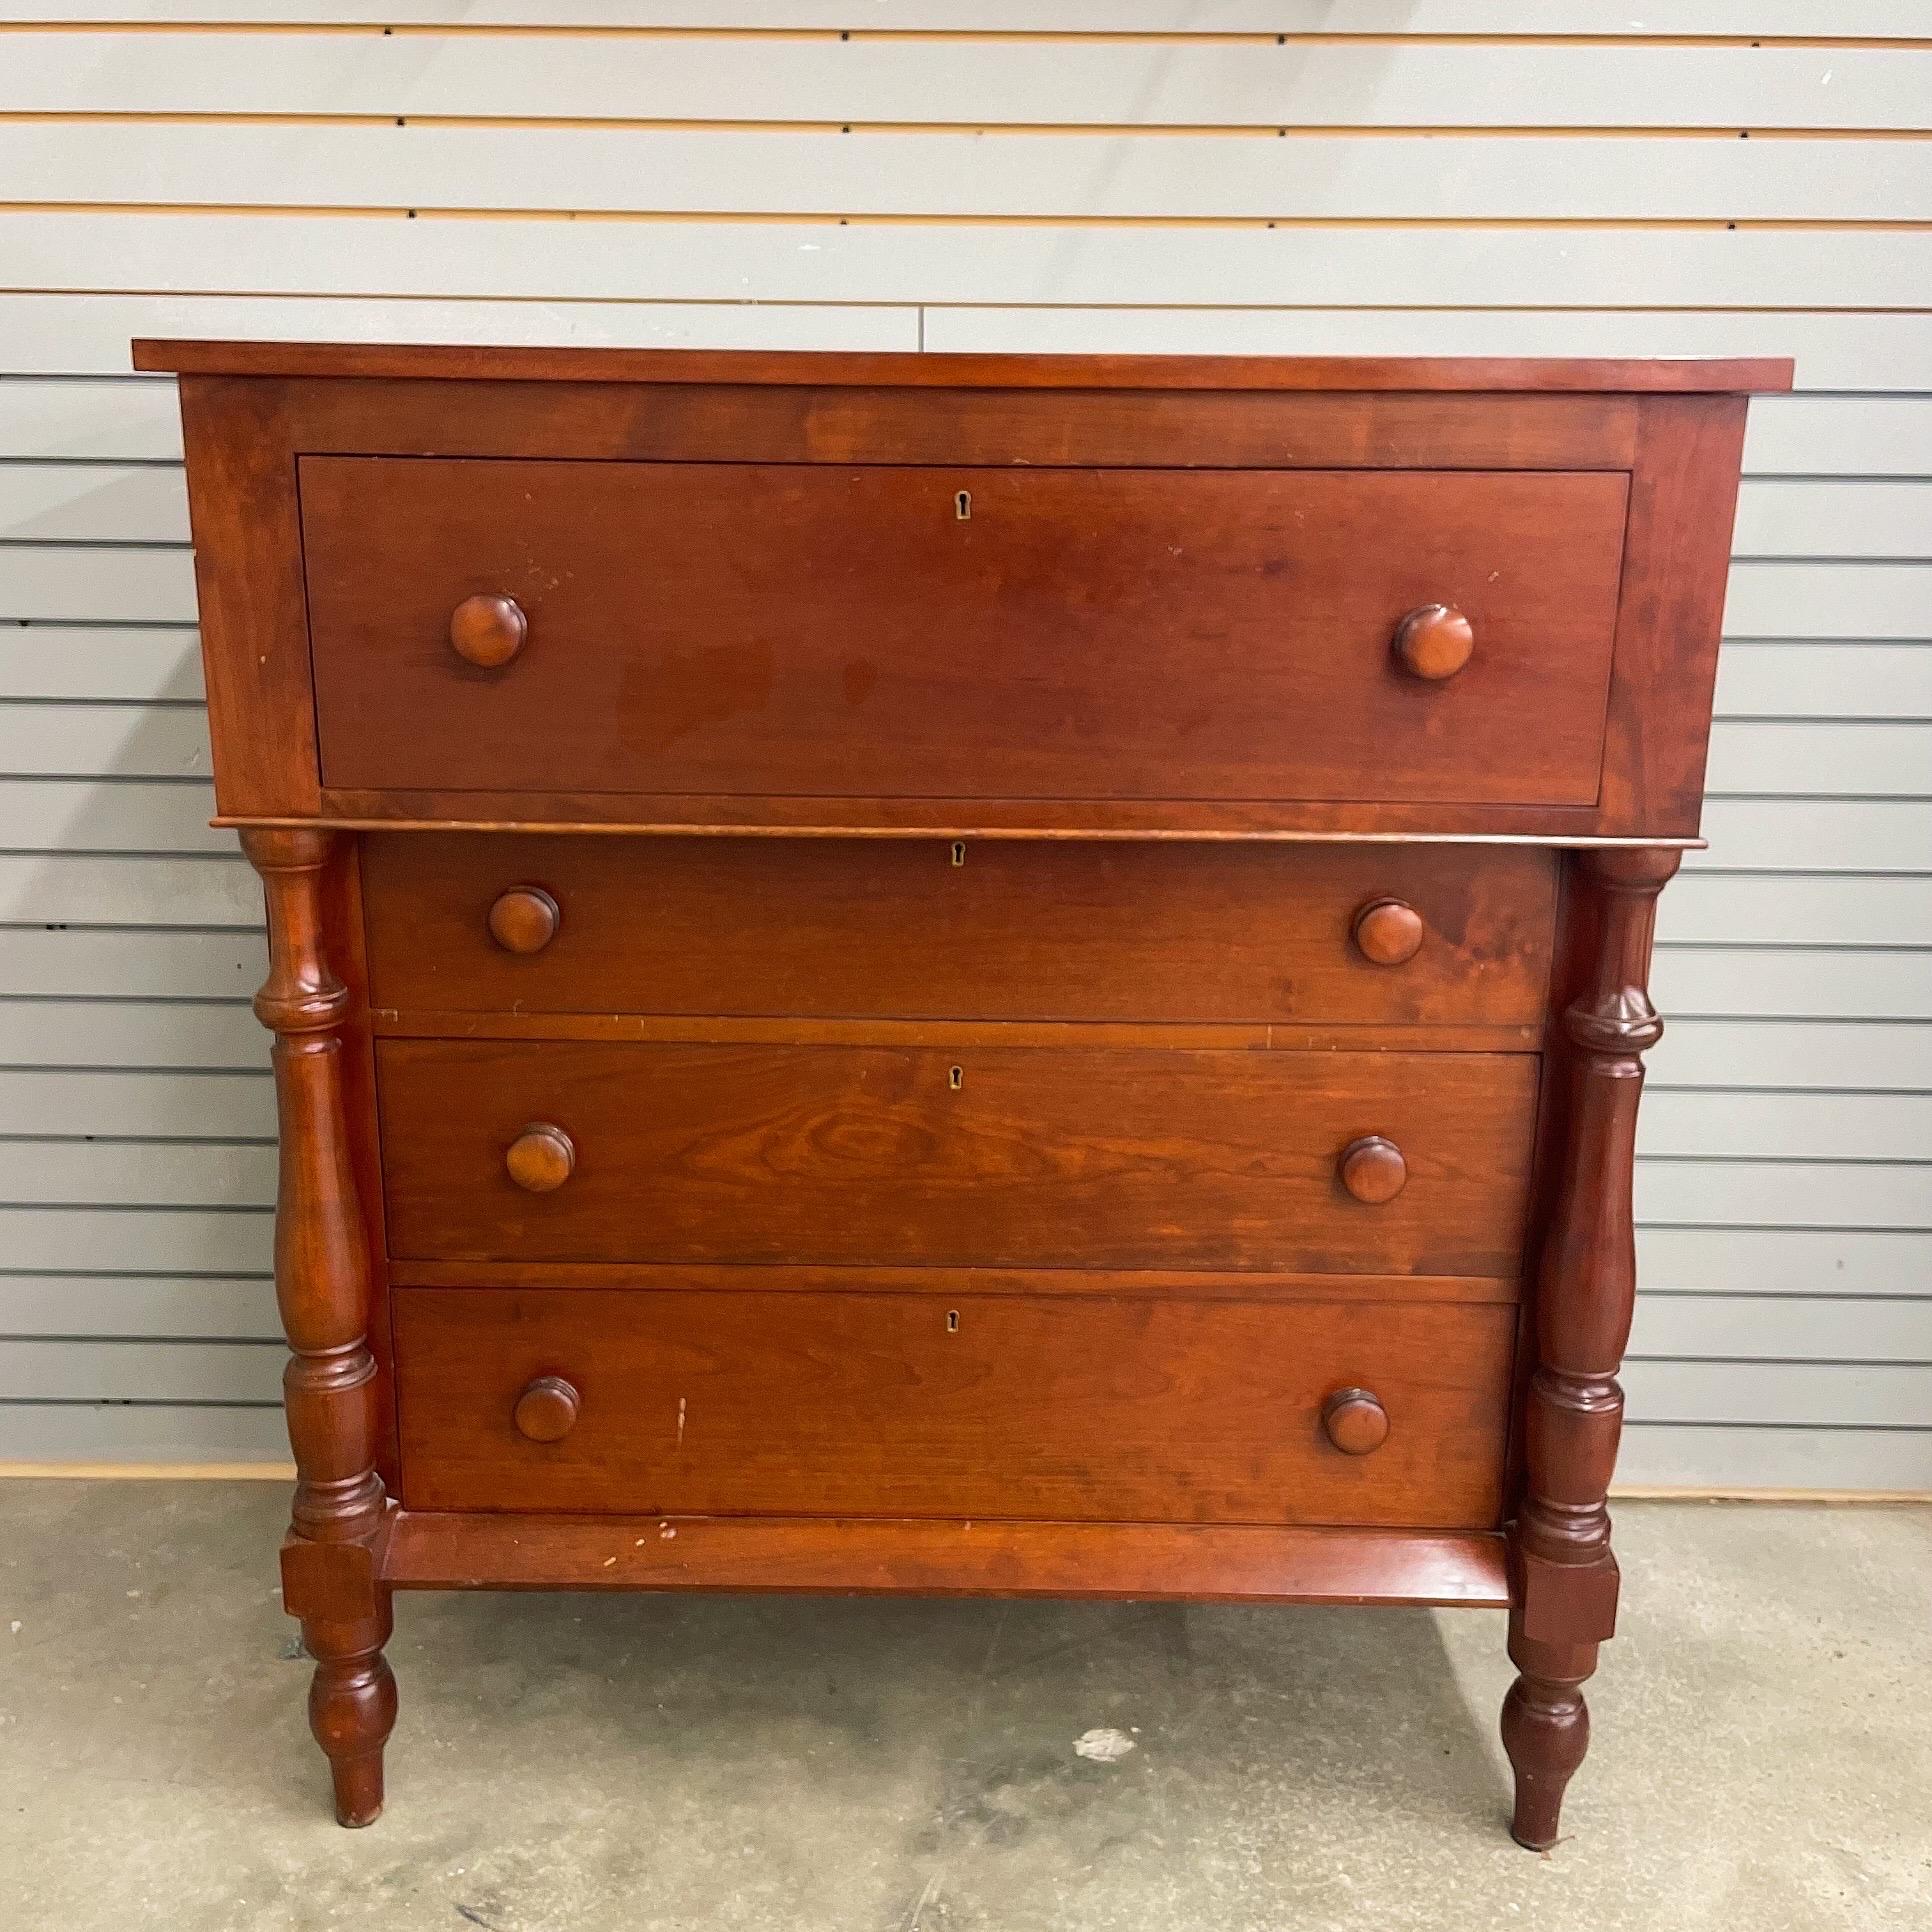 Beautifully crafted Empire style solid cherry wood chest of drawers. Dovetail joints, turned legs and drawer pulls. Amazing aged patina. In classic empire style, the top drawer is the largest and deepest. Highly carved posts on the dresser and 4